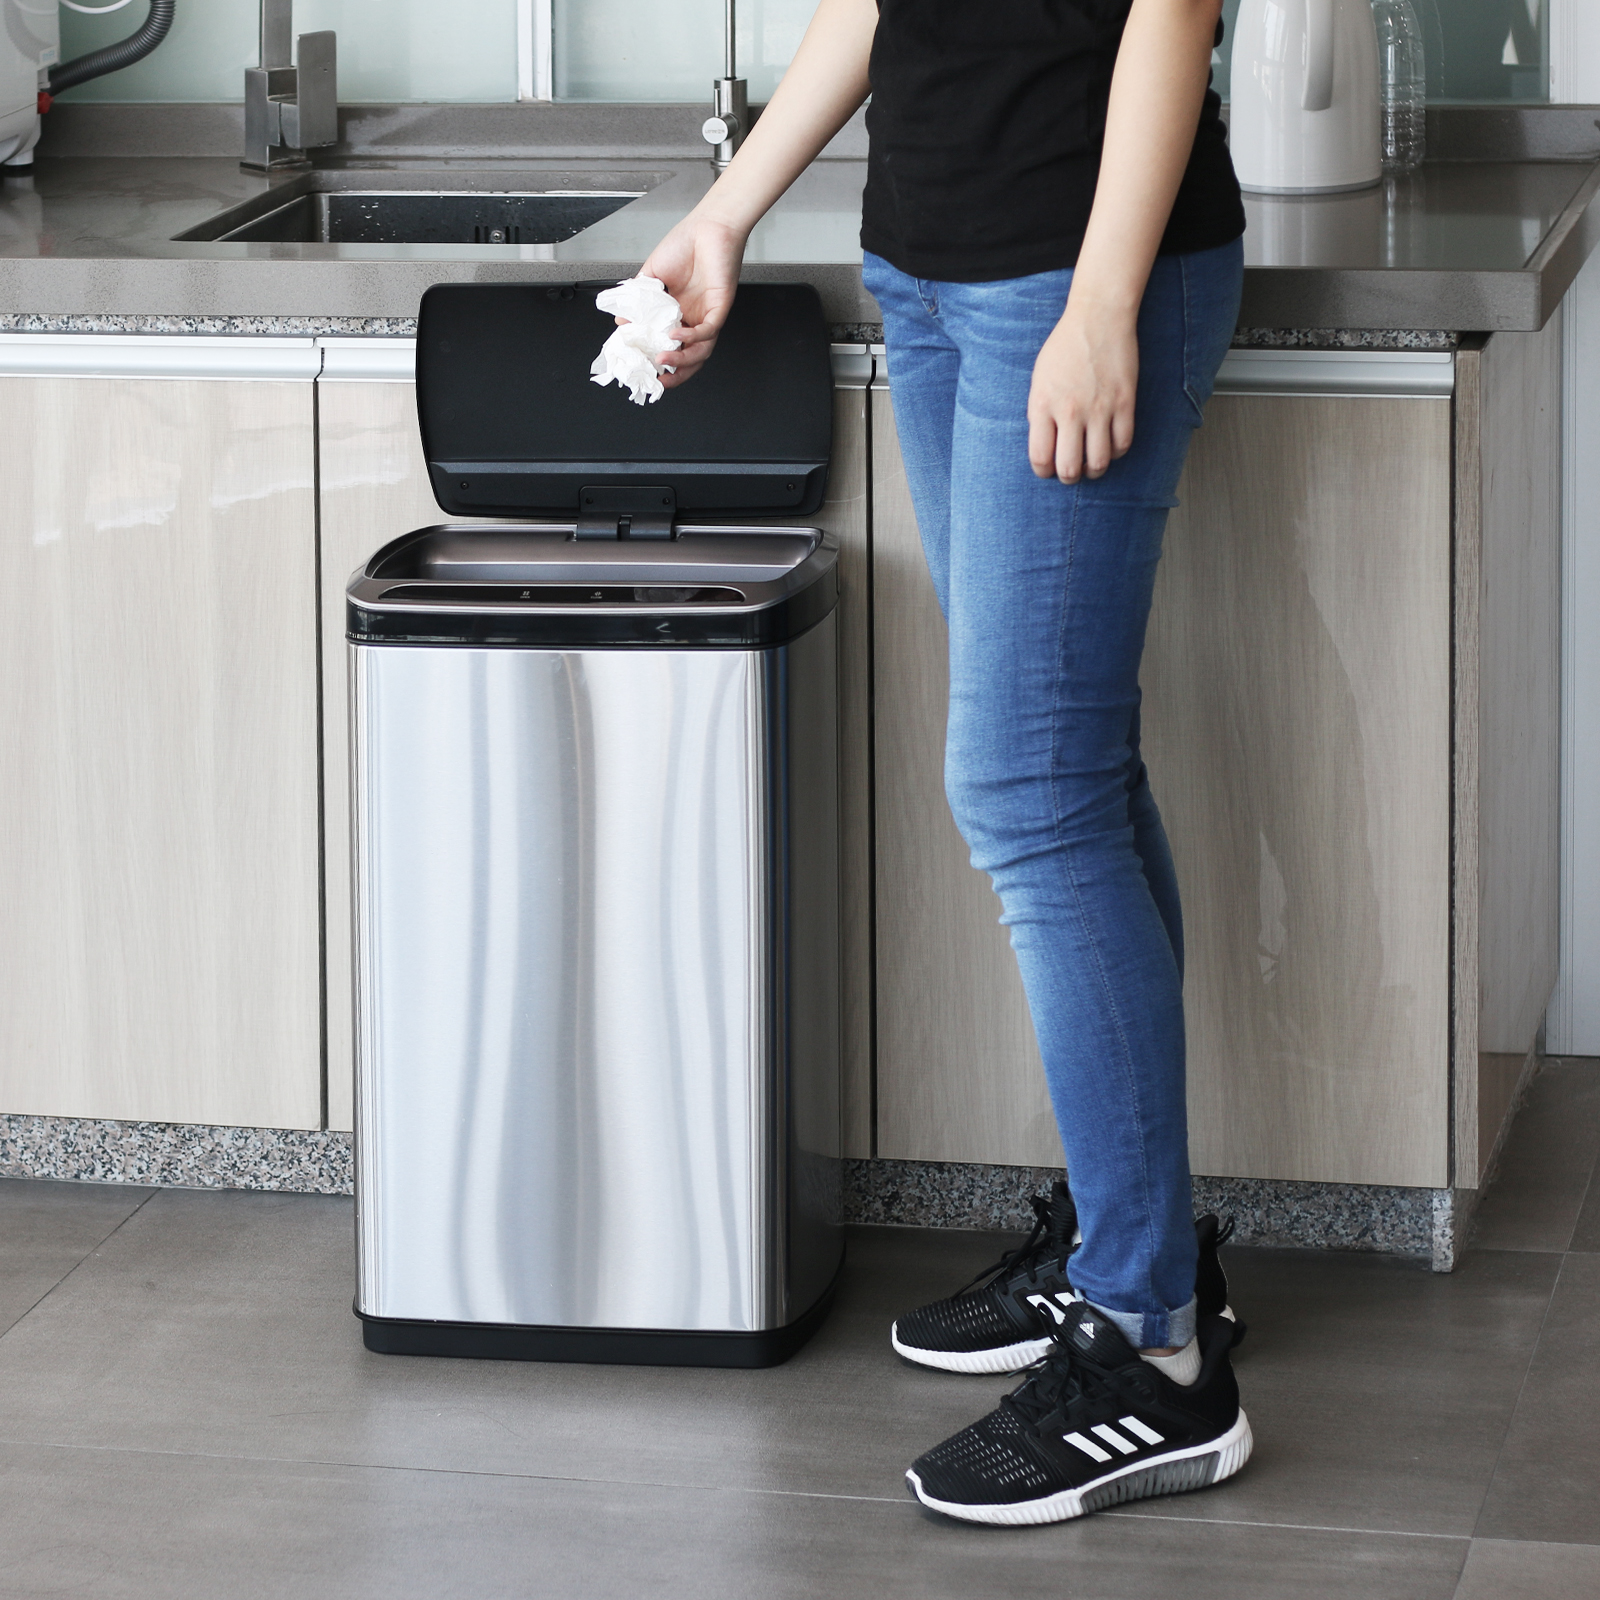 Household 50L touchless garbage bins trash can 13 gallon automatic smart sensor trash can chrome